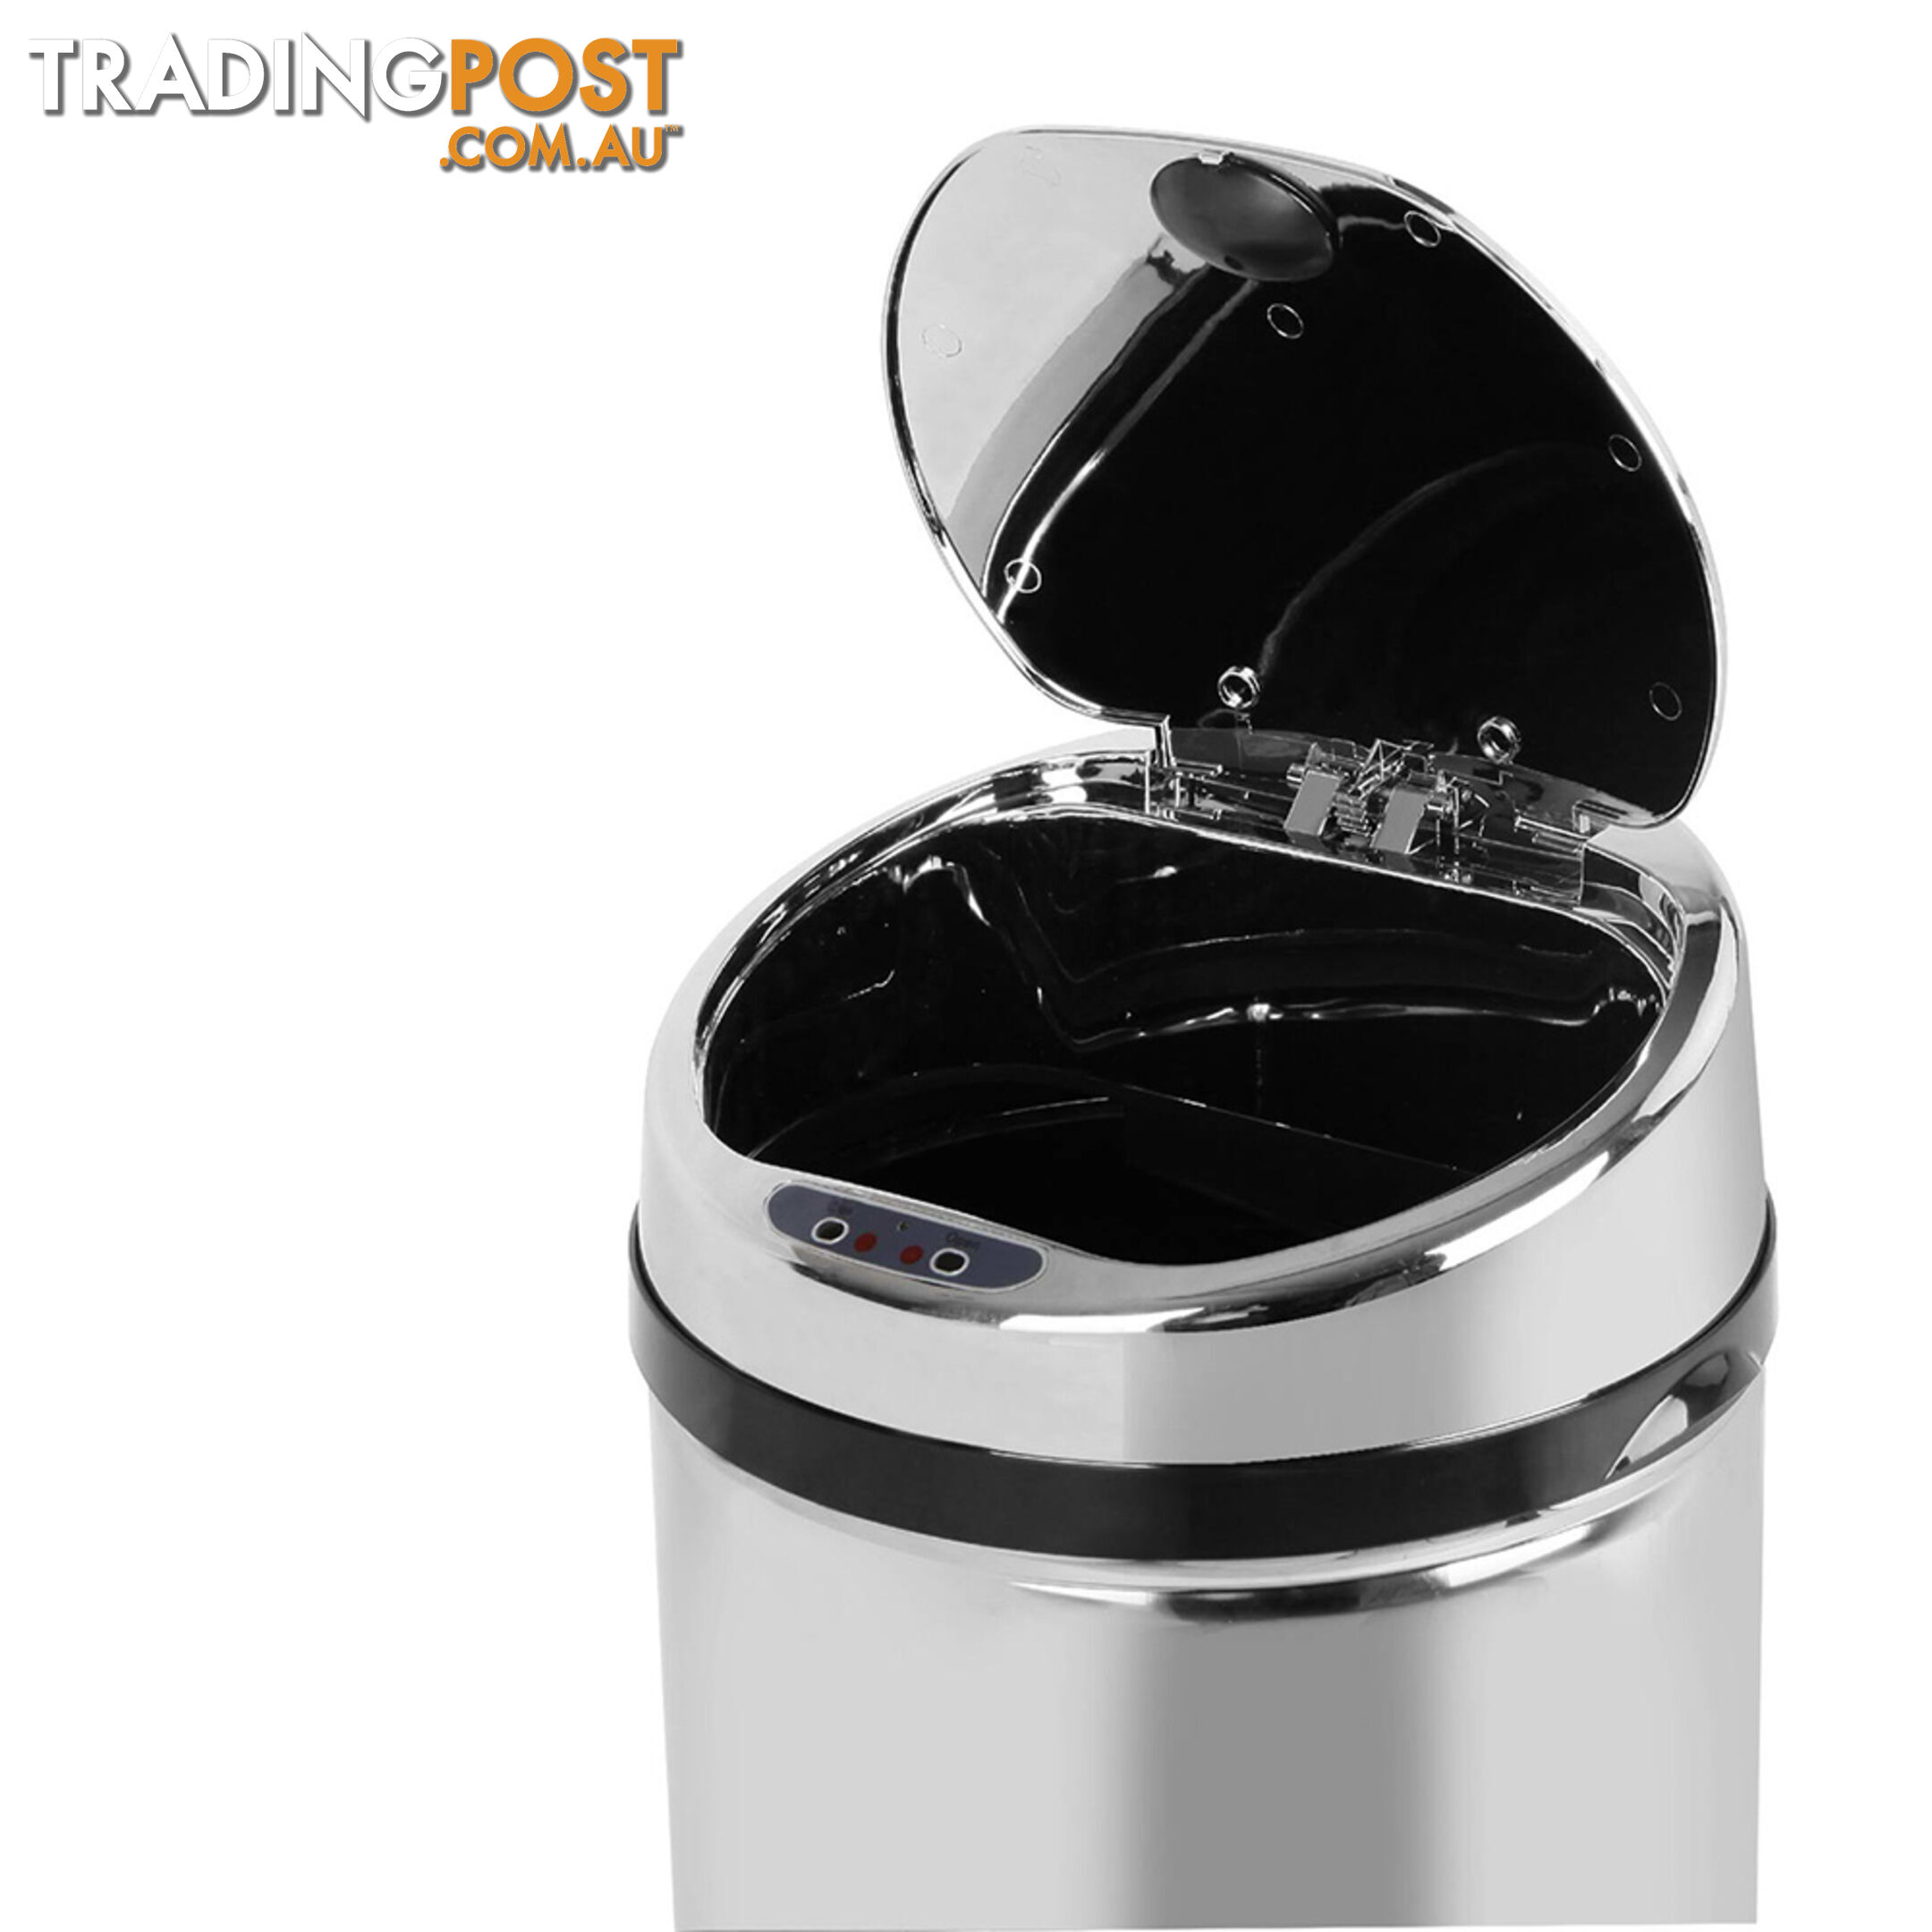 50L Motion Sensor Stainless Steel Rubbish Bin Automatic Kitchen Waste Trash Can